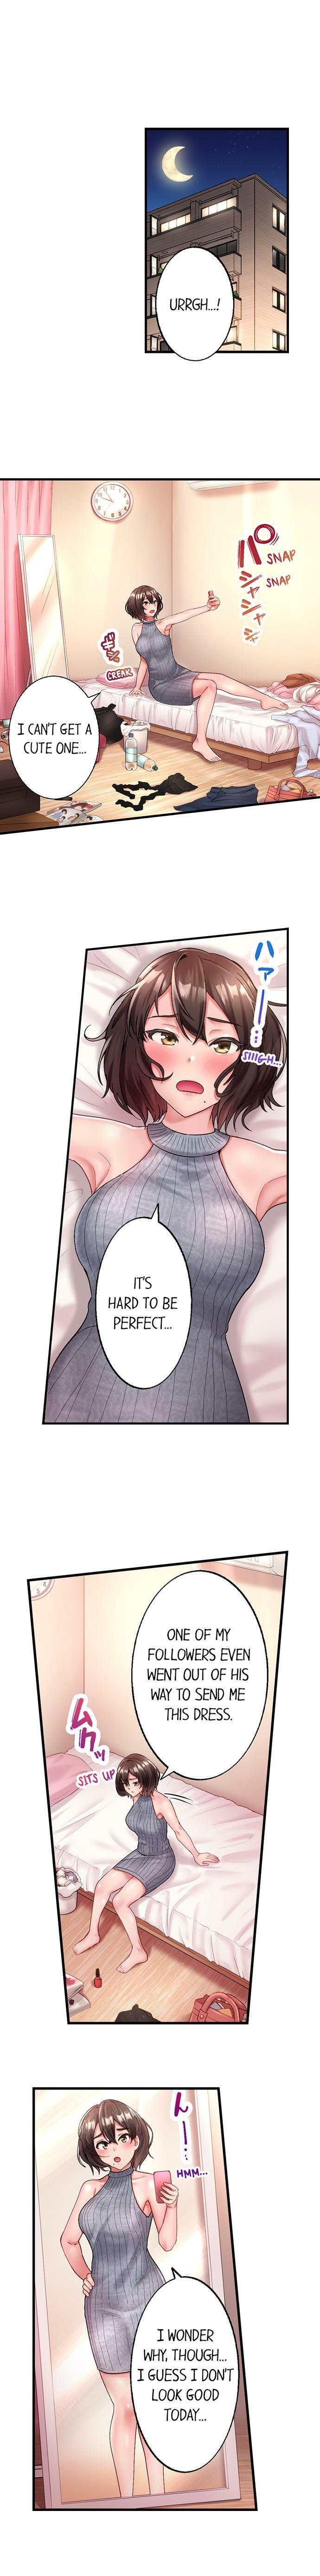 Culos [Kayanoi Ino] Busted by my Co-Worker 18/18 [English] Completed Sluts - Page 7